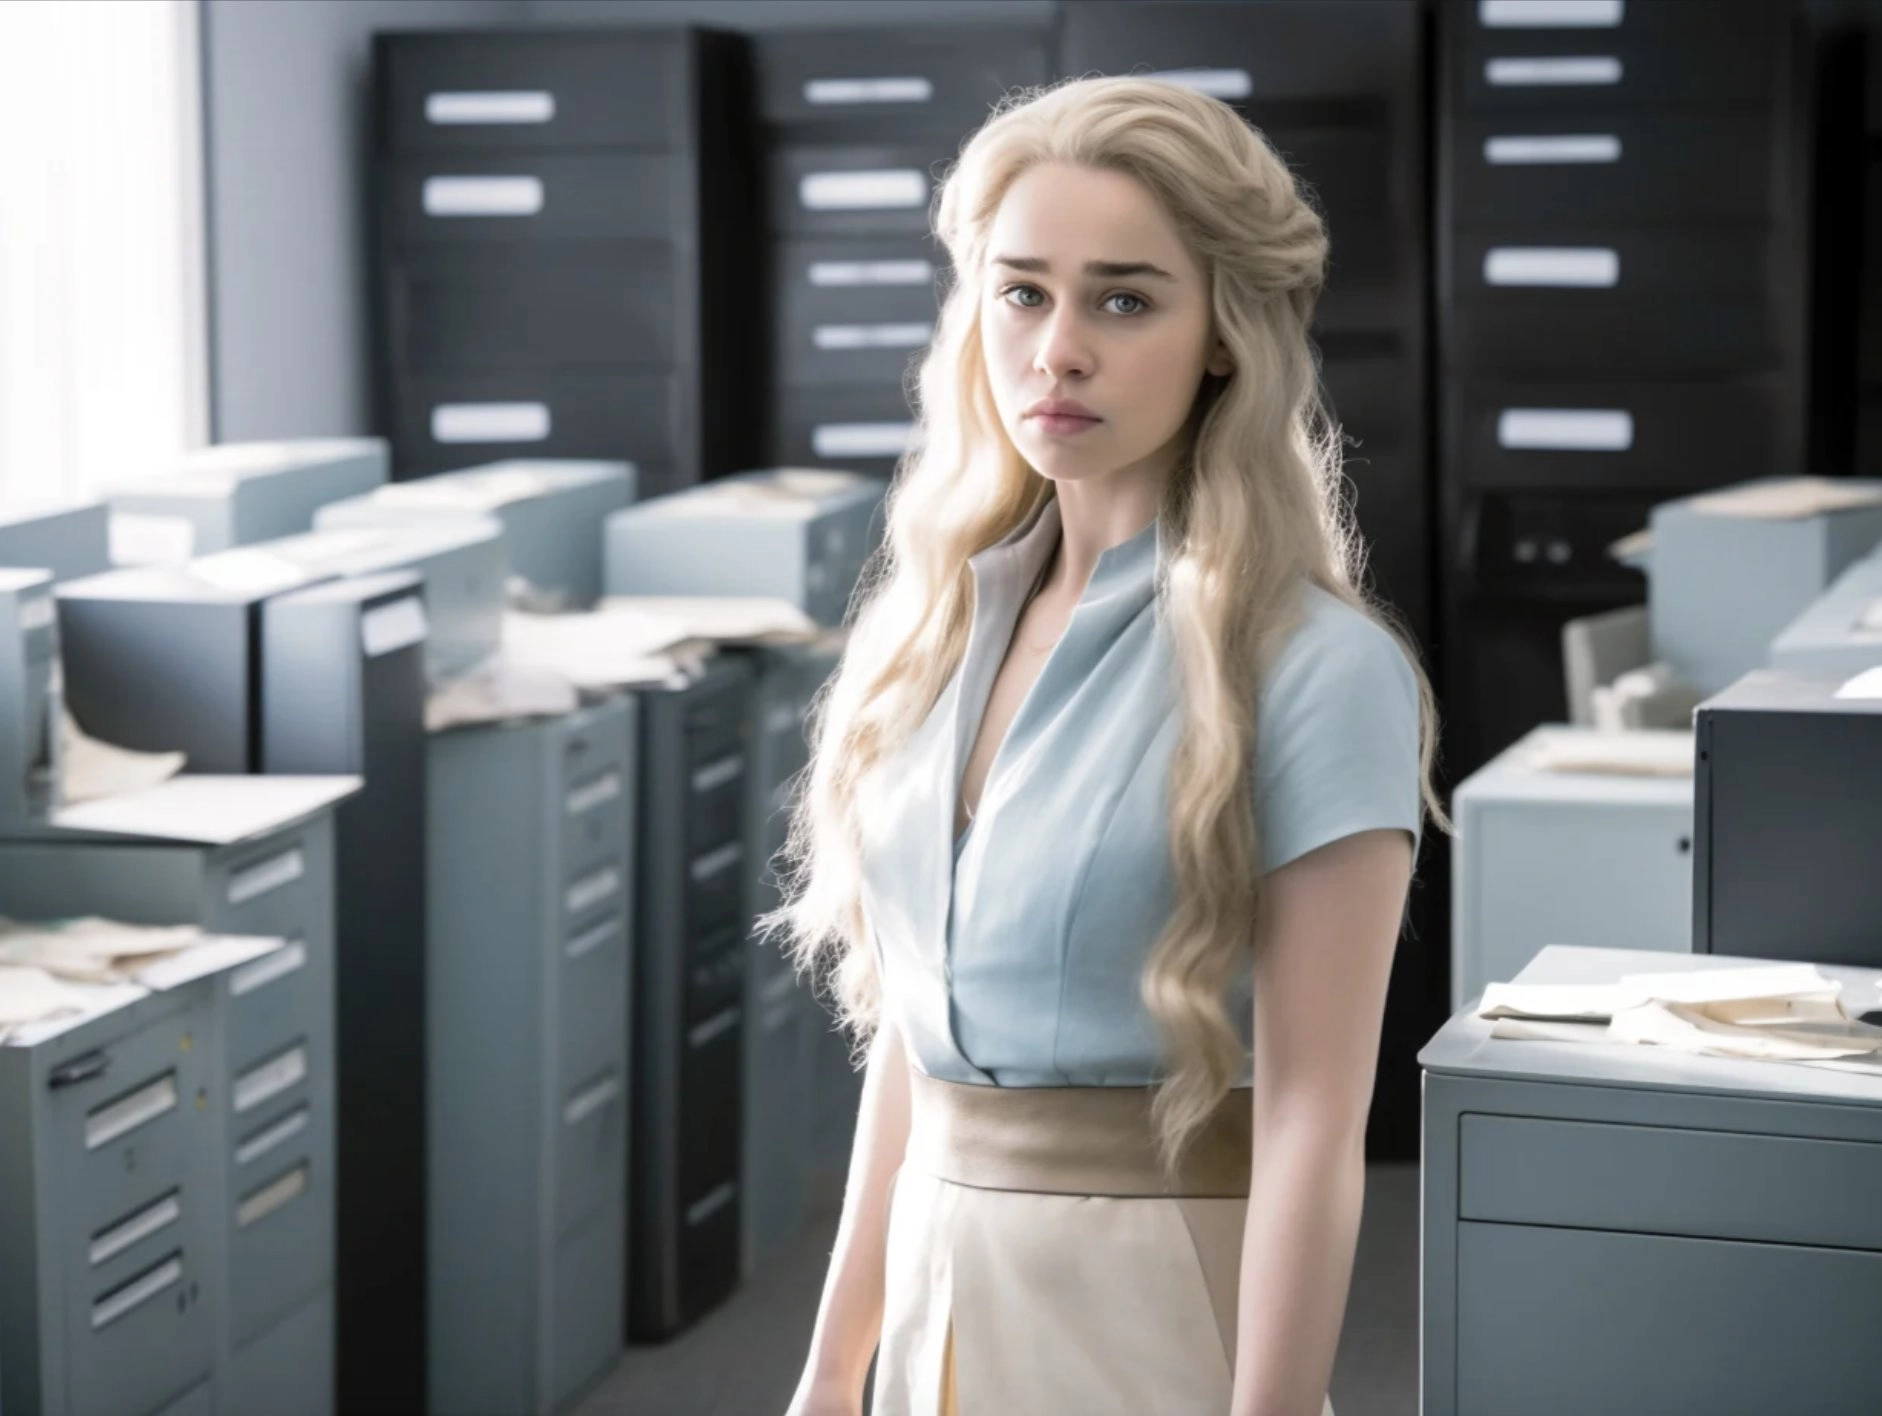 Reimagining AI-generated images of Game of Thrones characters in the style of The Office. Images generated using Midjourney Daenerys Targaryen.